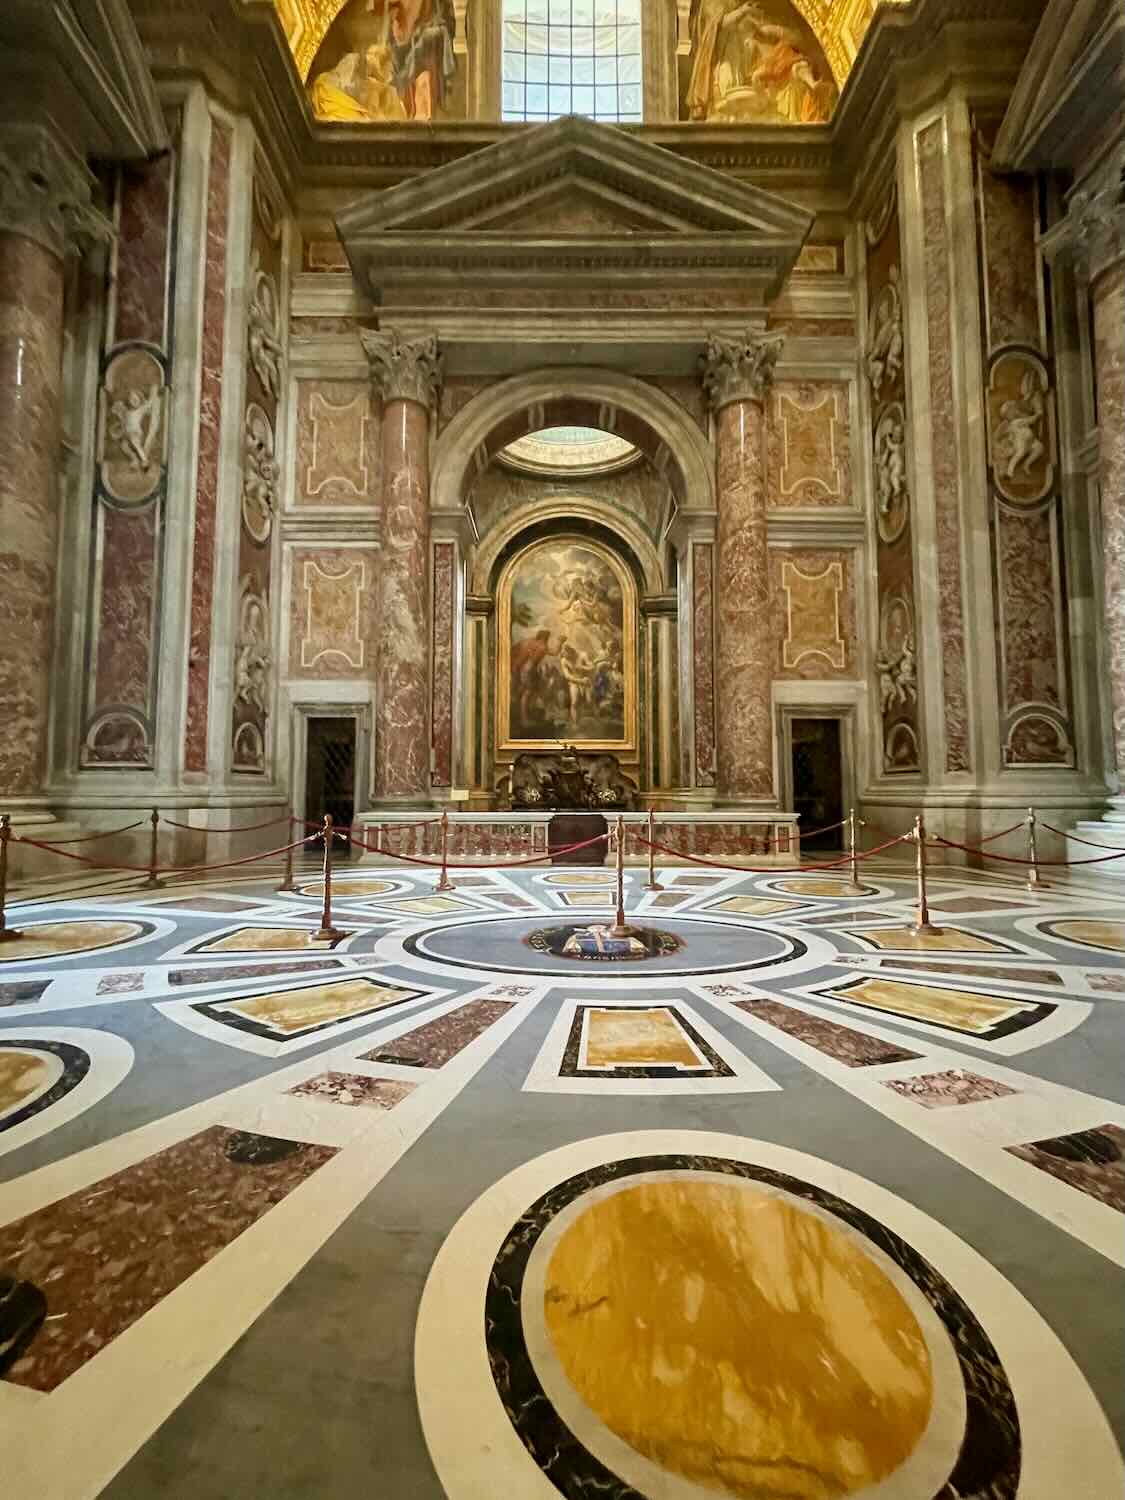 An interior view of a grand room in the Vatican, showcasing an intricate marble floor with circular patterns, tall marble columns, and an ornate altar with religious artwork and statues.